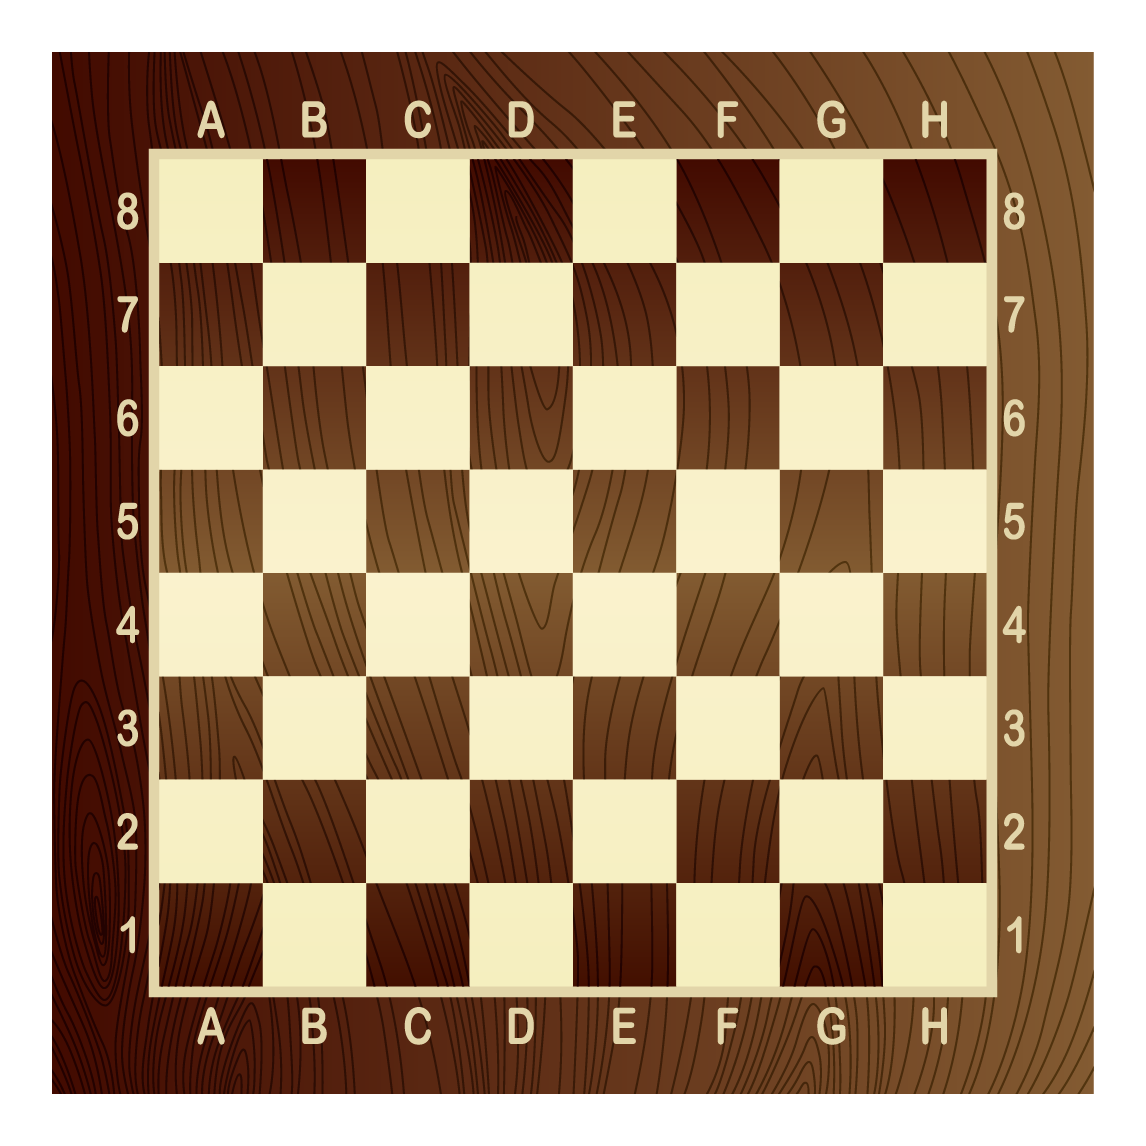 Checkers board labelled horizontally A to H, and vertically one to 8.